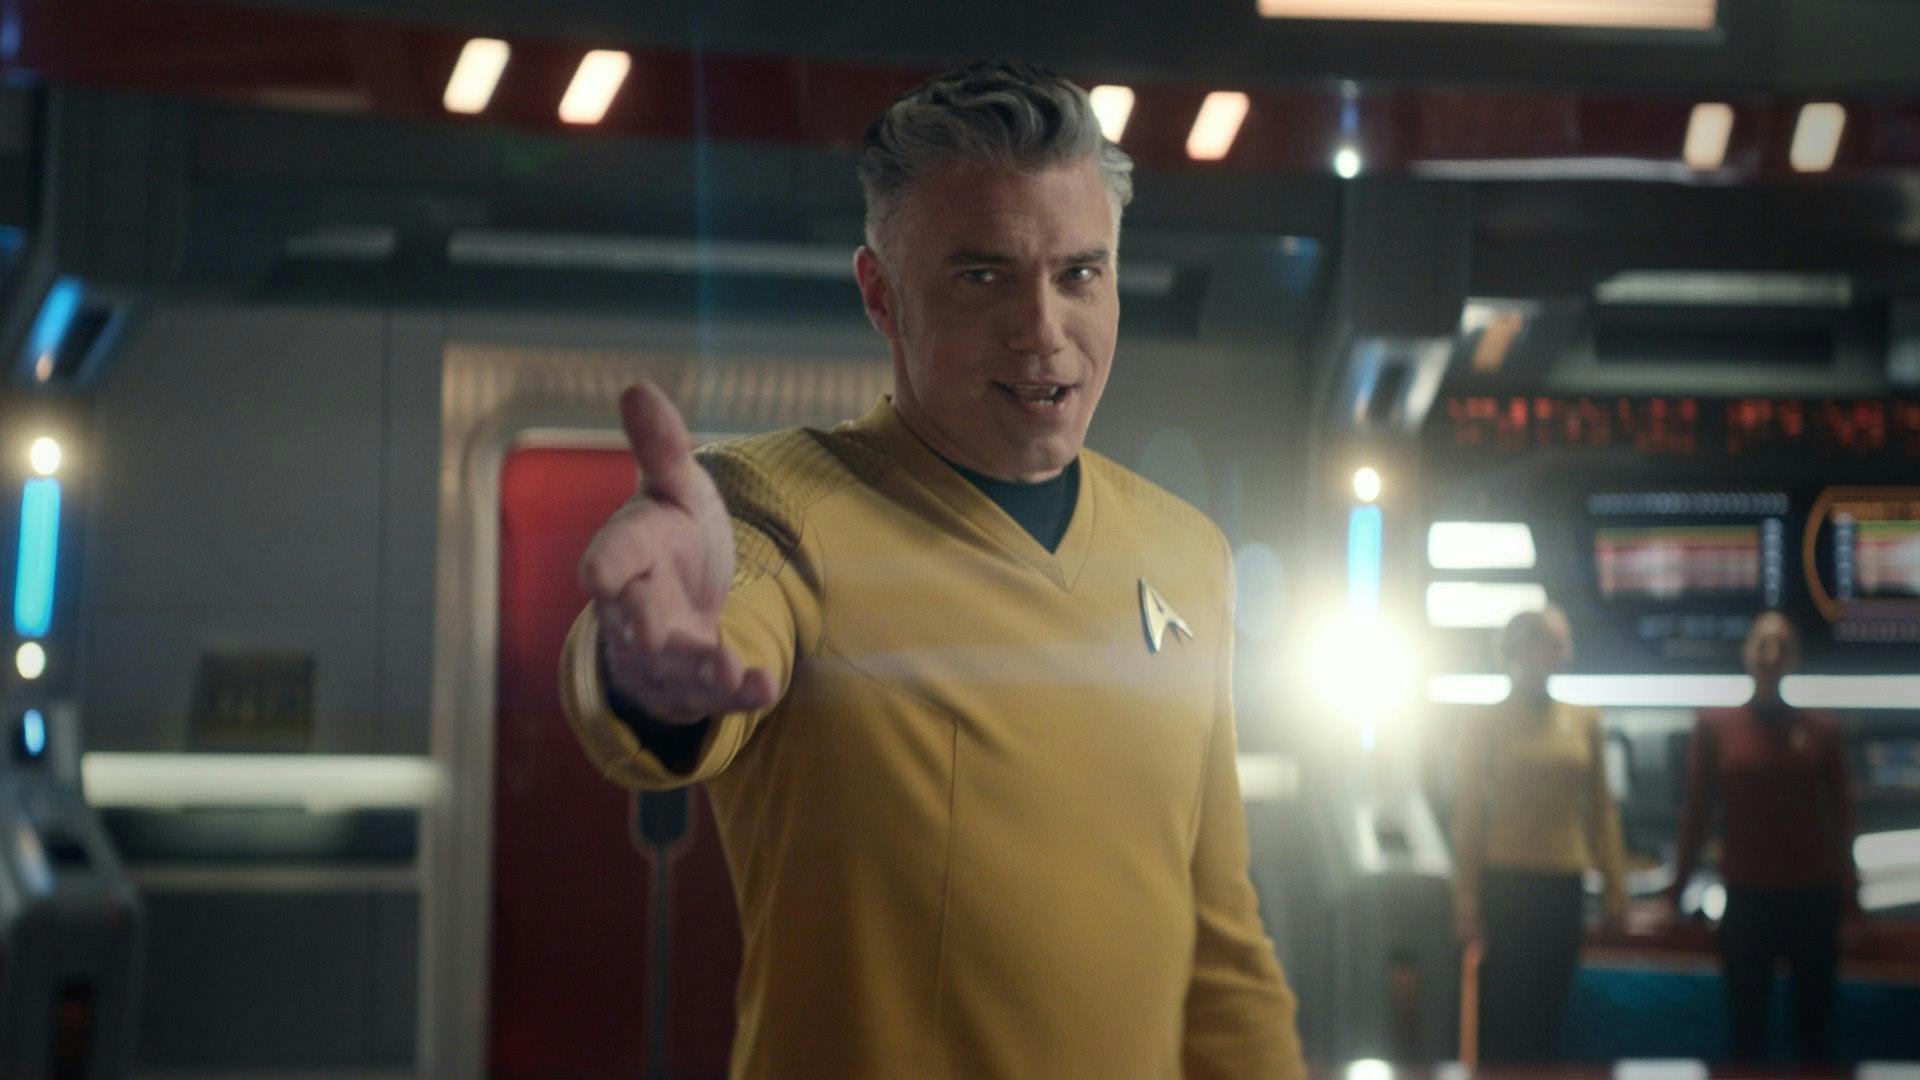 On the Bridge of the Enterprise, Captain Pike extends his right arm out ahead of him in 'Subspace Rhapsody'